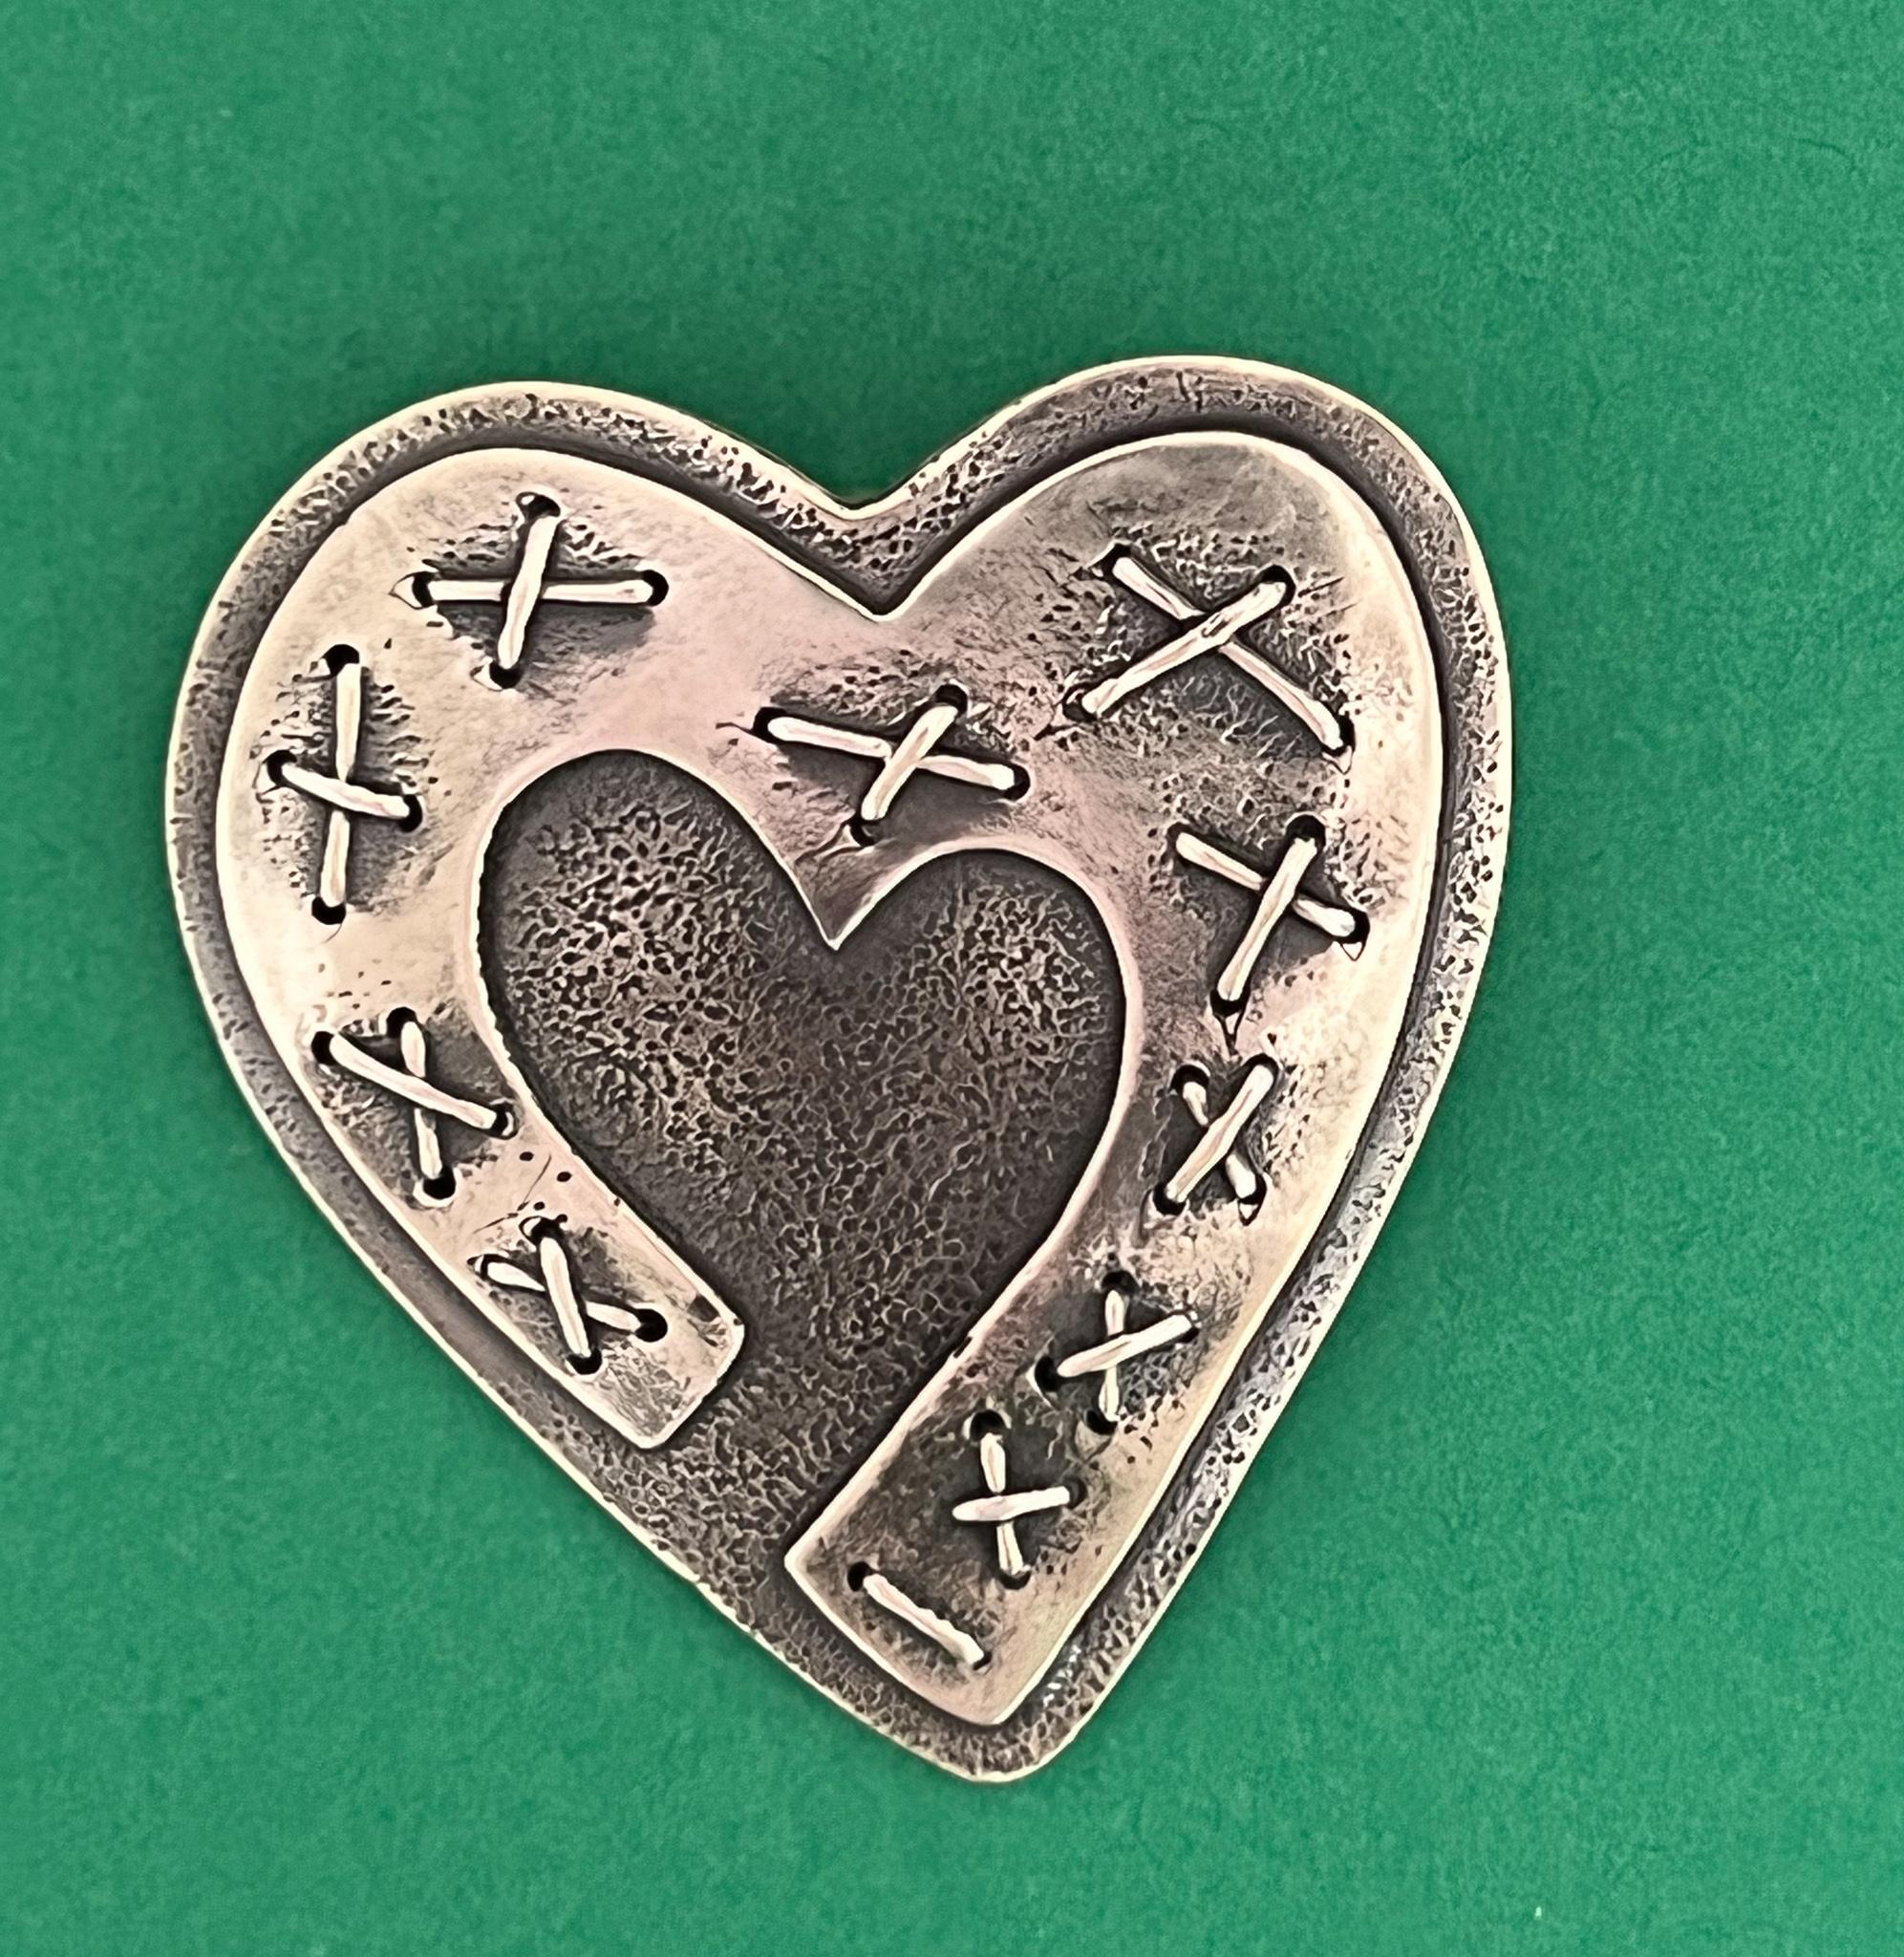 Mended, Heart by Kerry Green, sterling silver, pin, pendant, layered, stitched, modern

Artist jewelry line, ready to wear as a pin or pendant. Made in Santa Fe, New Mexico